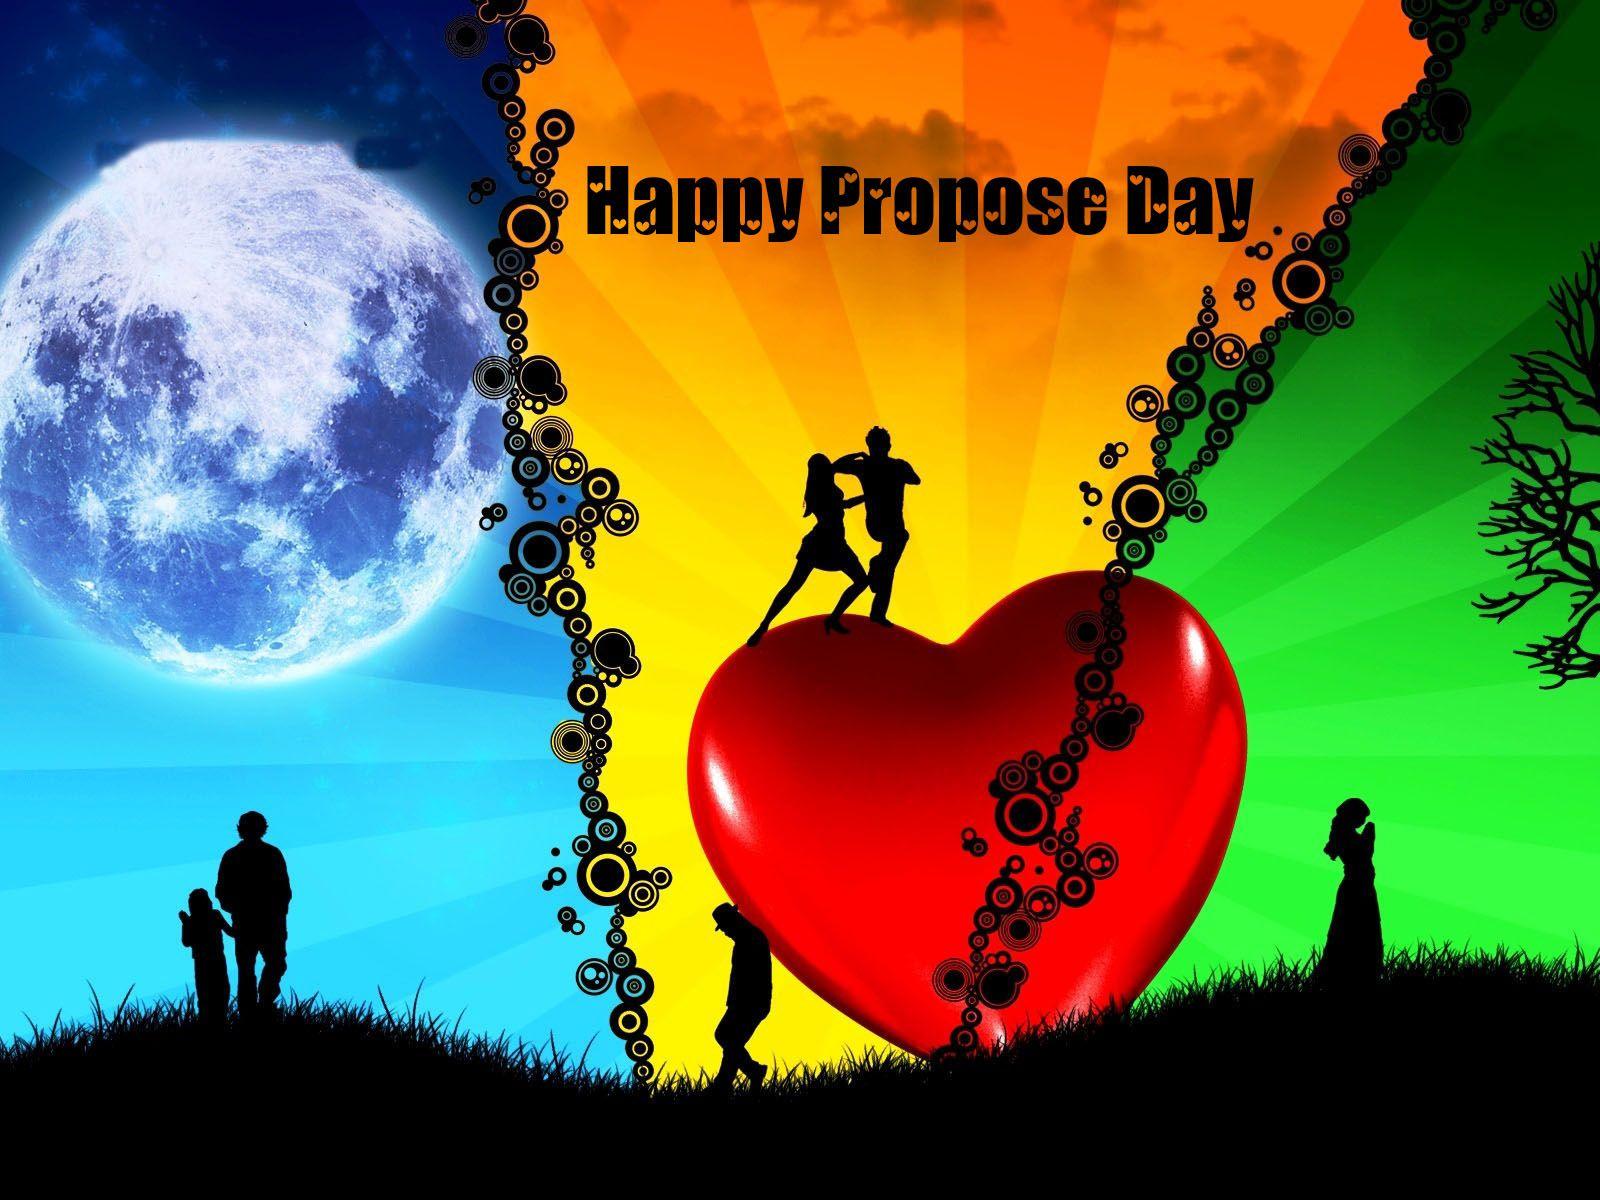 Happy Propose Day Couples February 8th Desktop Background HD Wallpaper